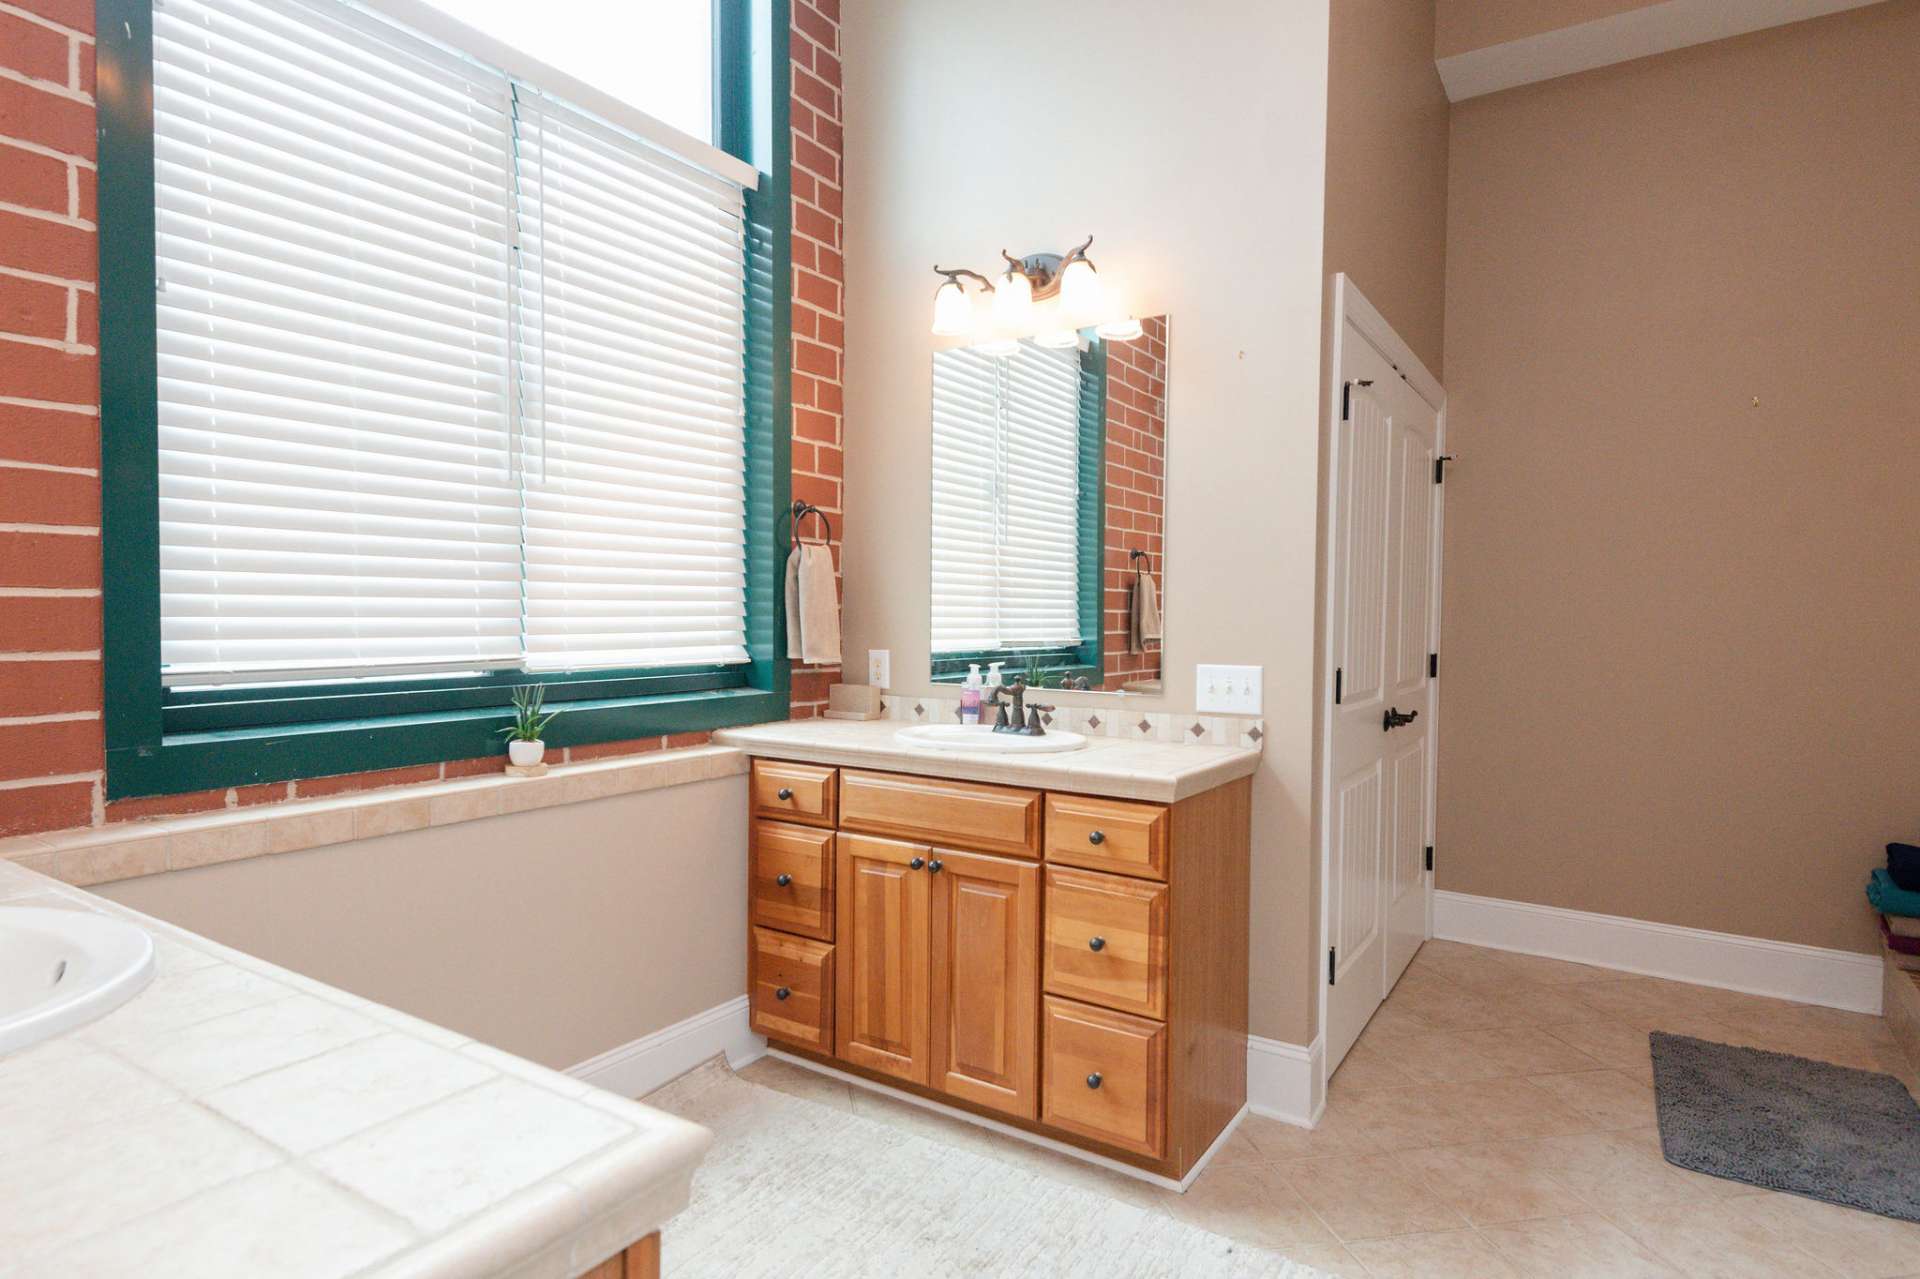 Large window in the master bath lets the natural light in at the twin vanities.